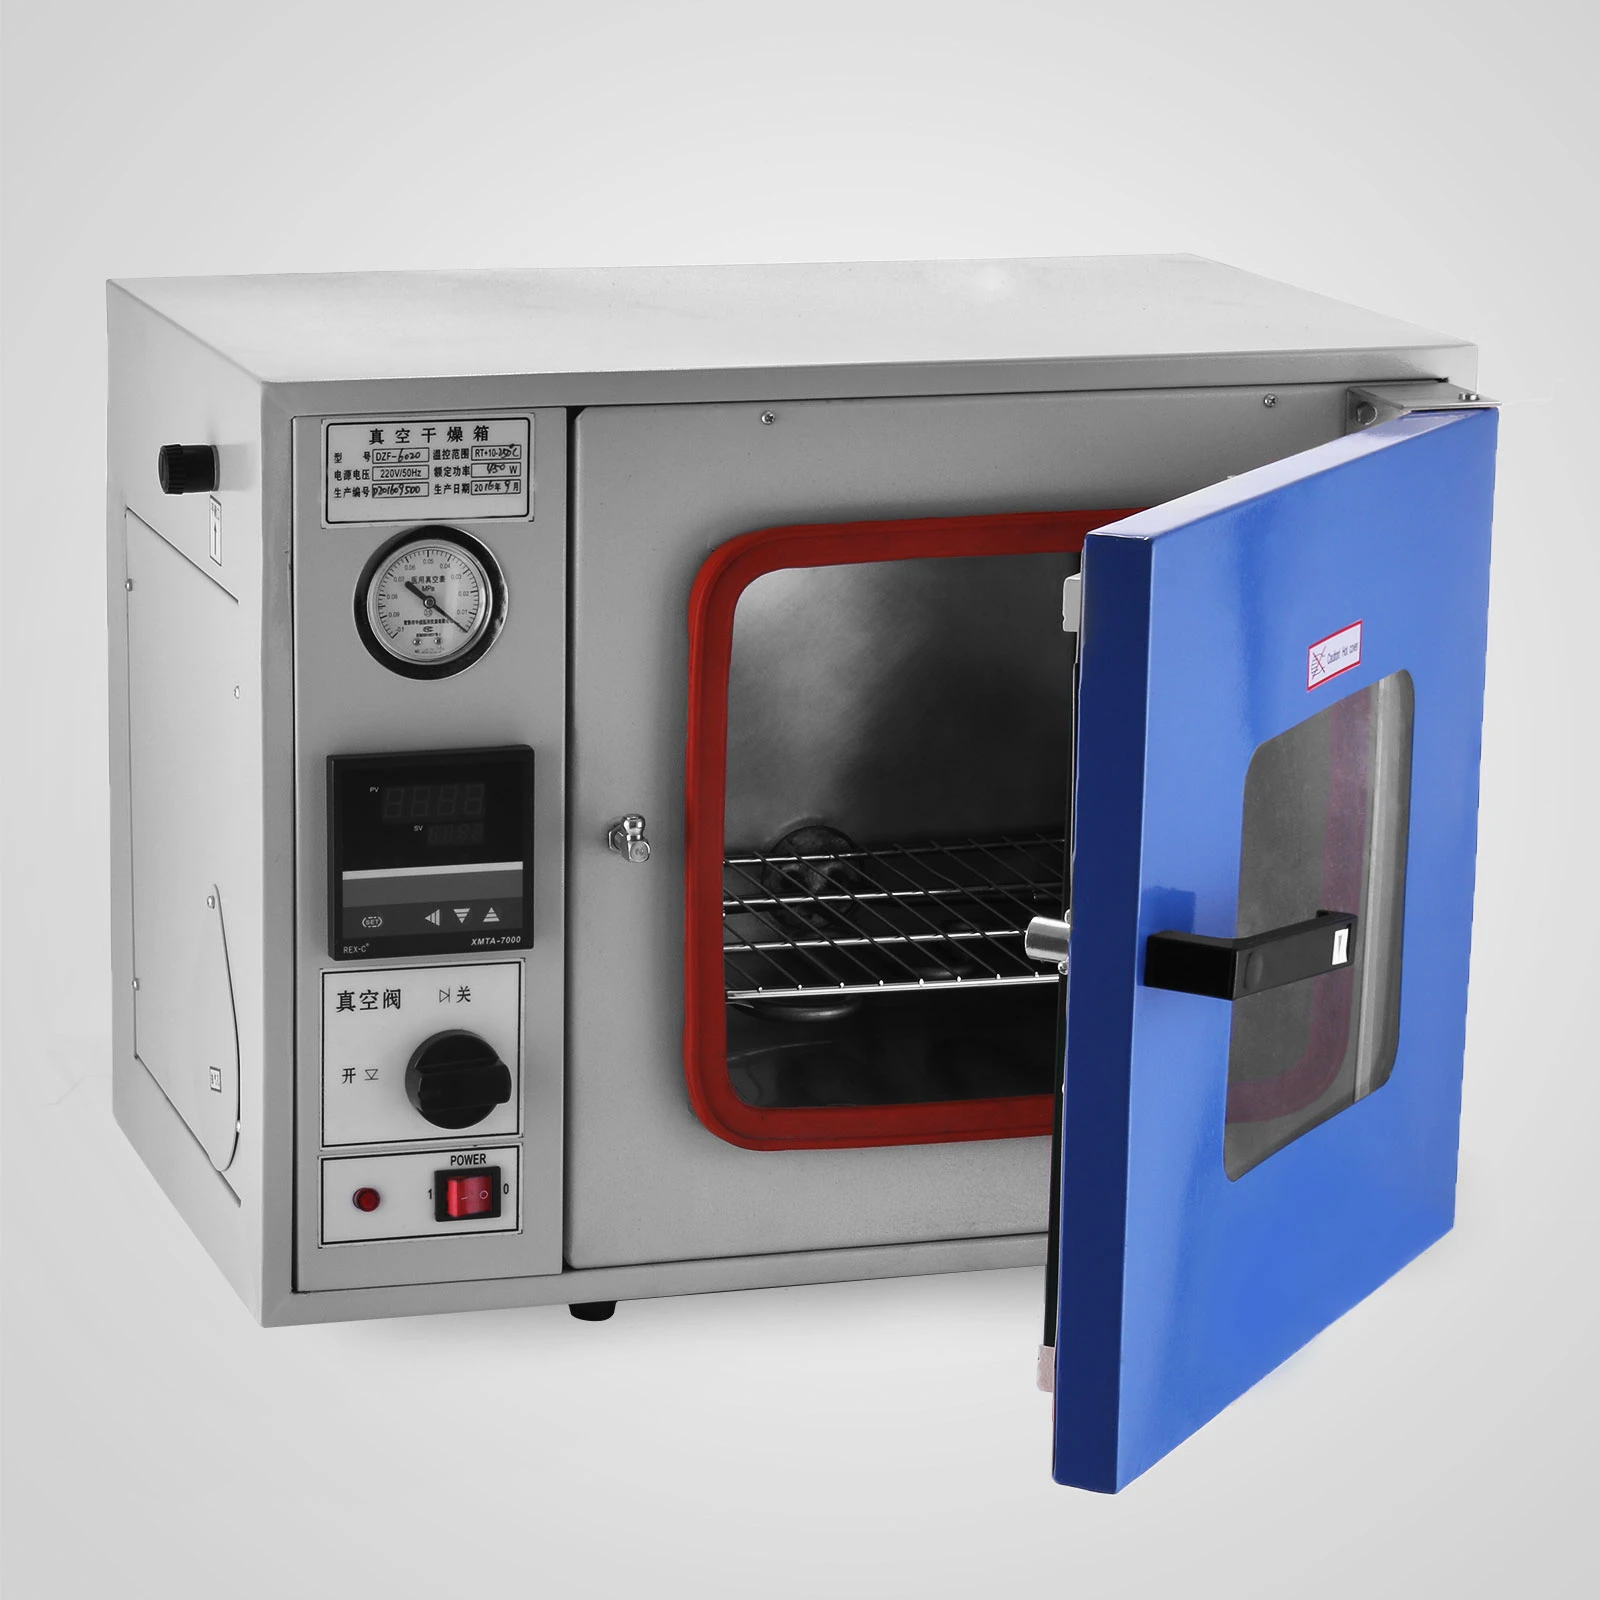 Drying Oven сушильный шкаф